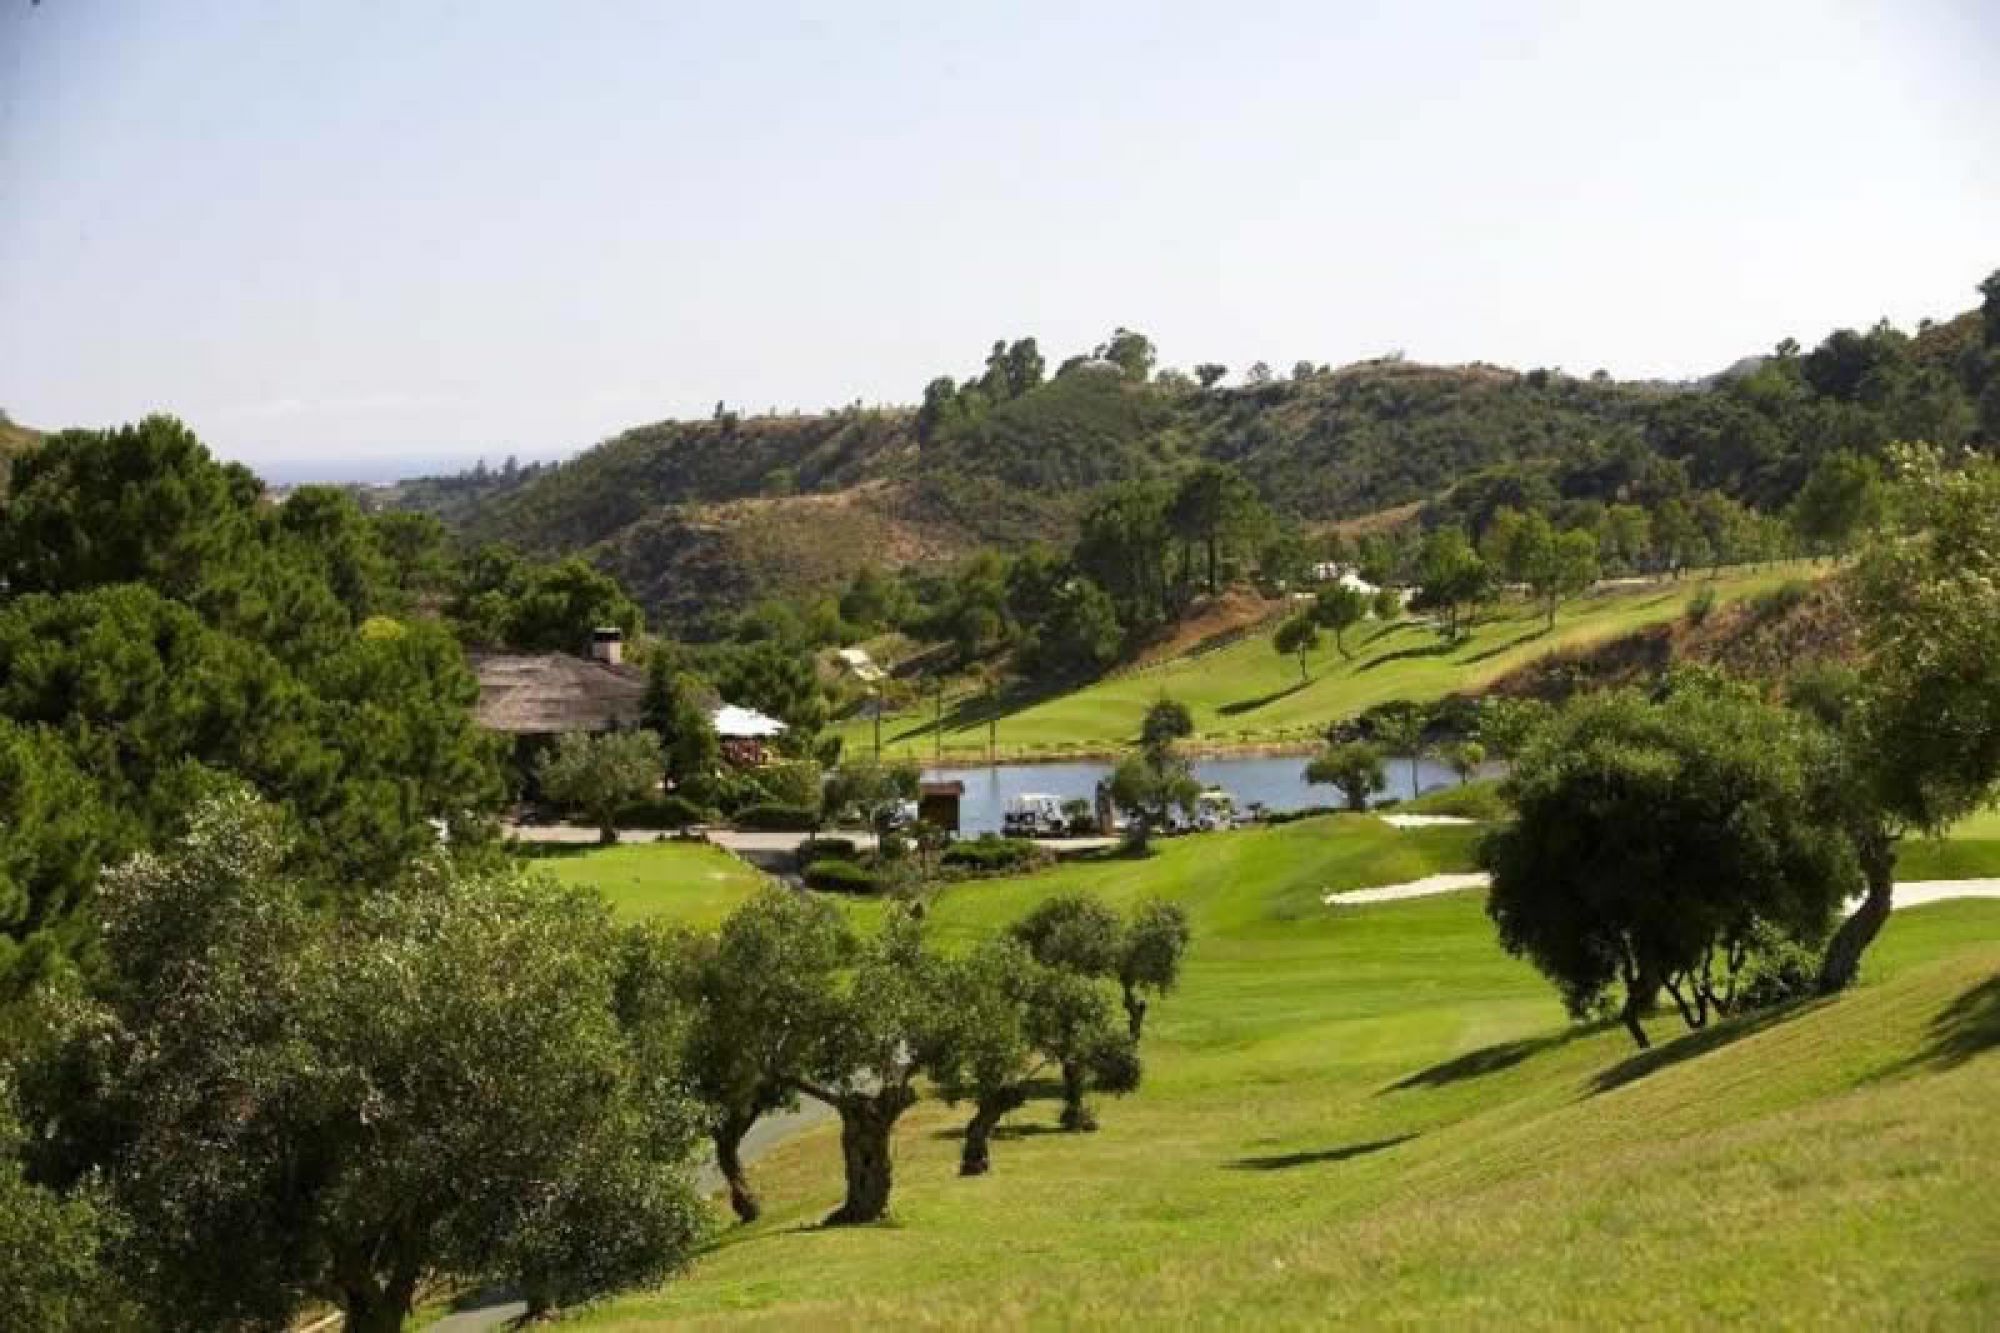 All The Marbella Golf and Country Club's lovely golf course in dramatic Costa Del Sol.